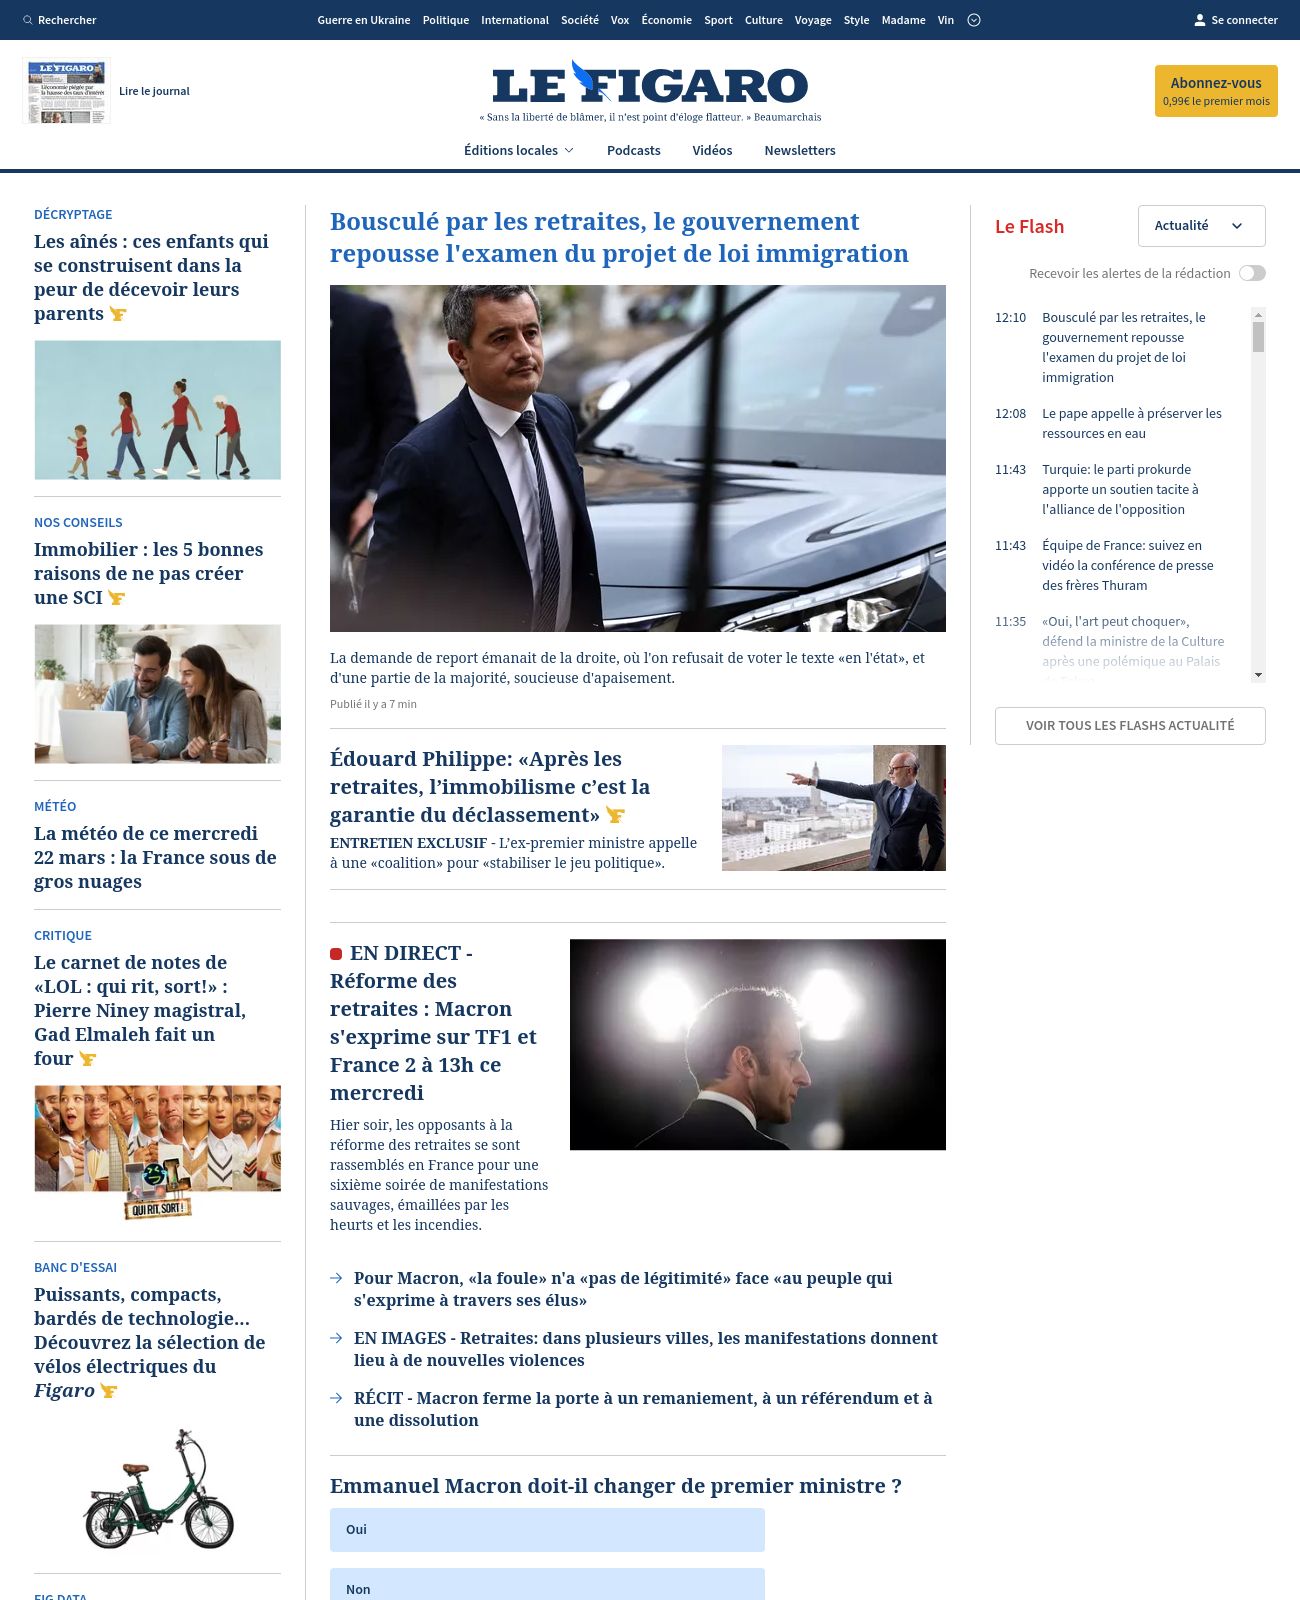 Le Figaro at 2023-03-22 12:28:18+01:00 local time